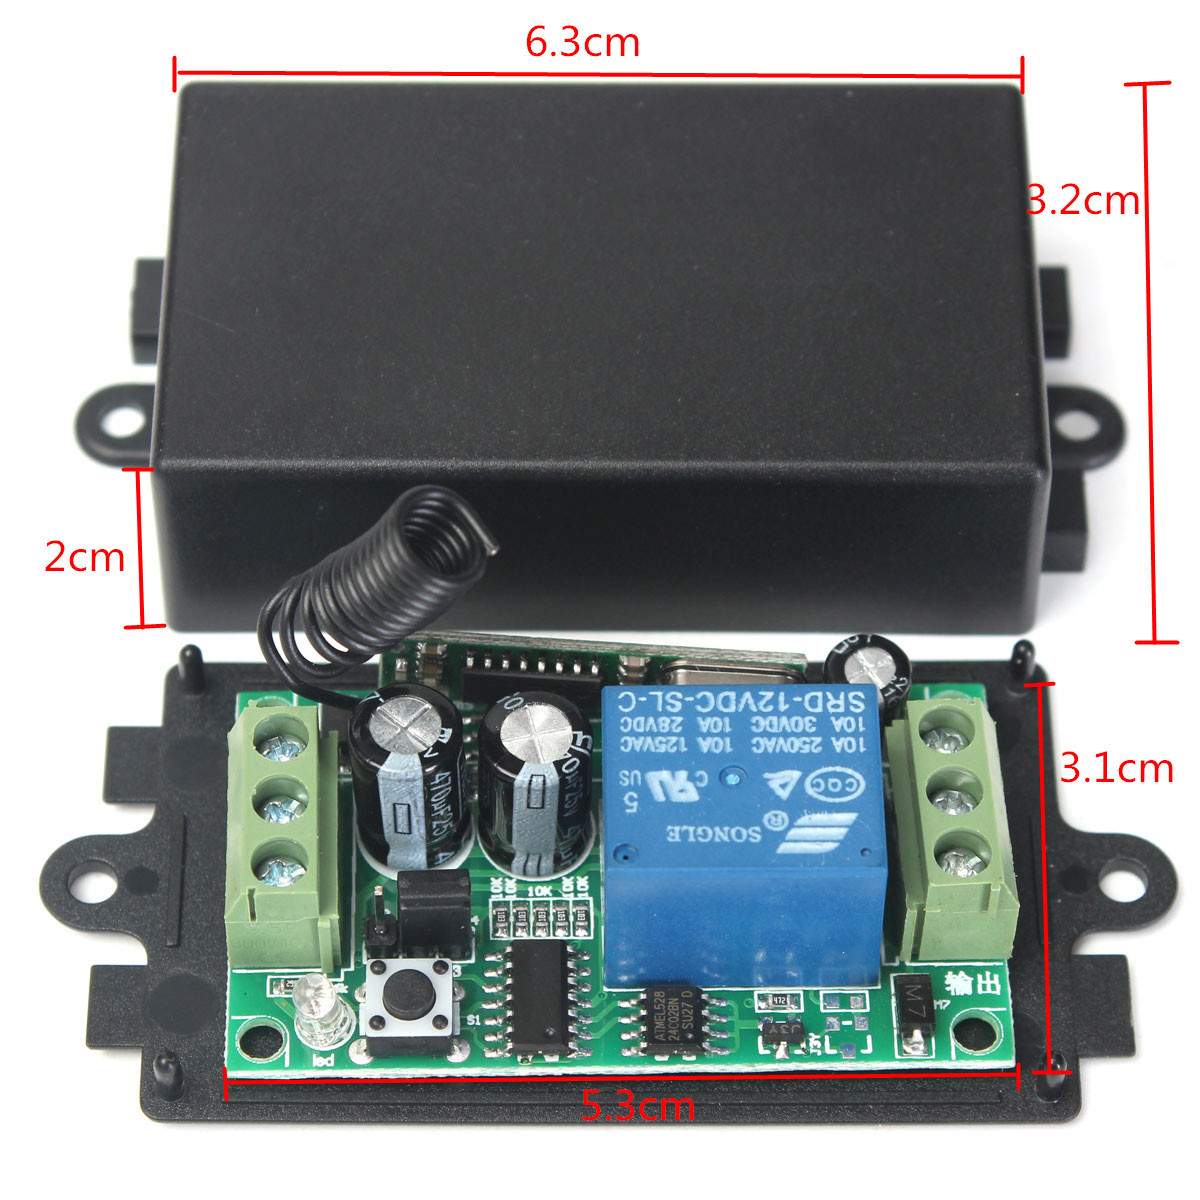 Geekcreitreg-433MHz-DC-12V-10A-Relay-1CH-Channel-Wireless-RF-Remote-Control-Switch-Transmitter-With--1040721